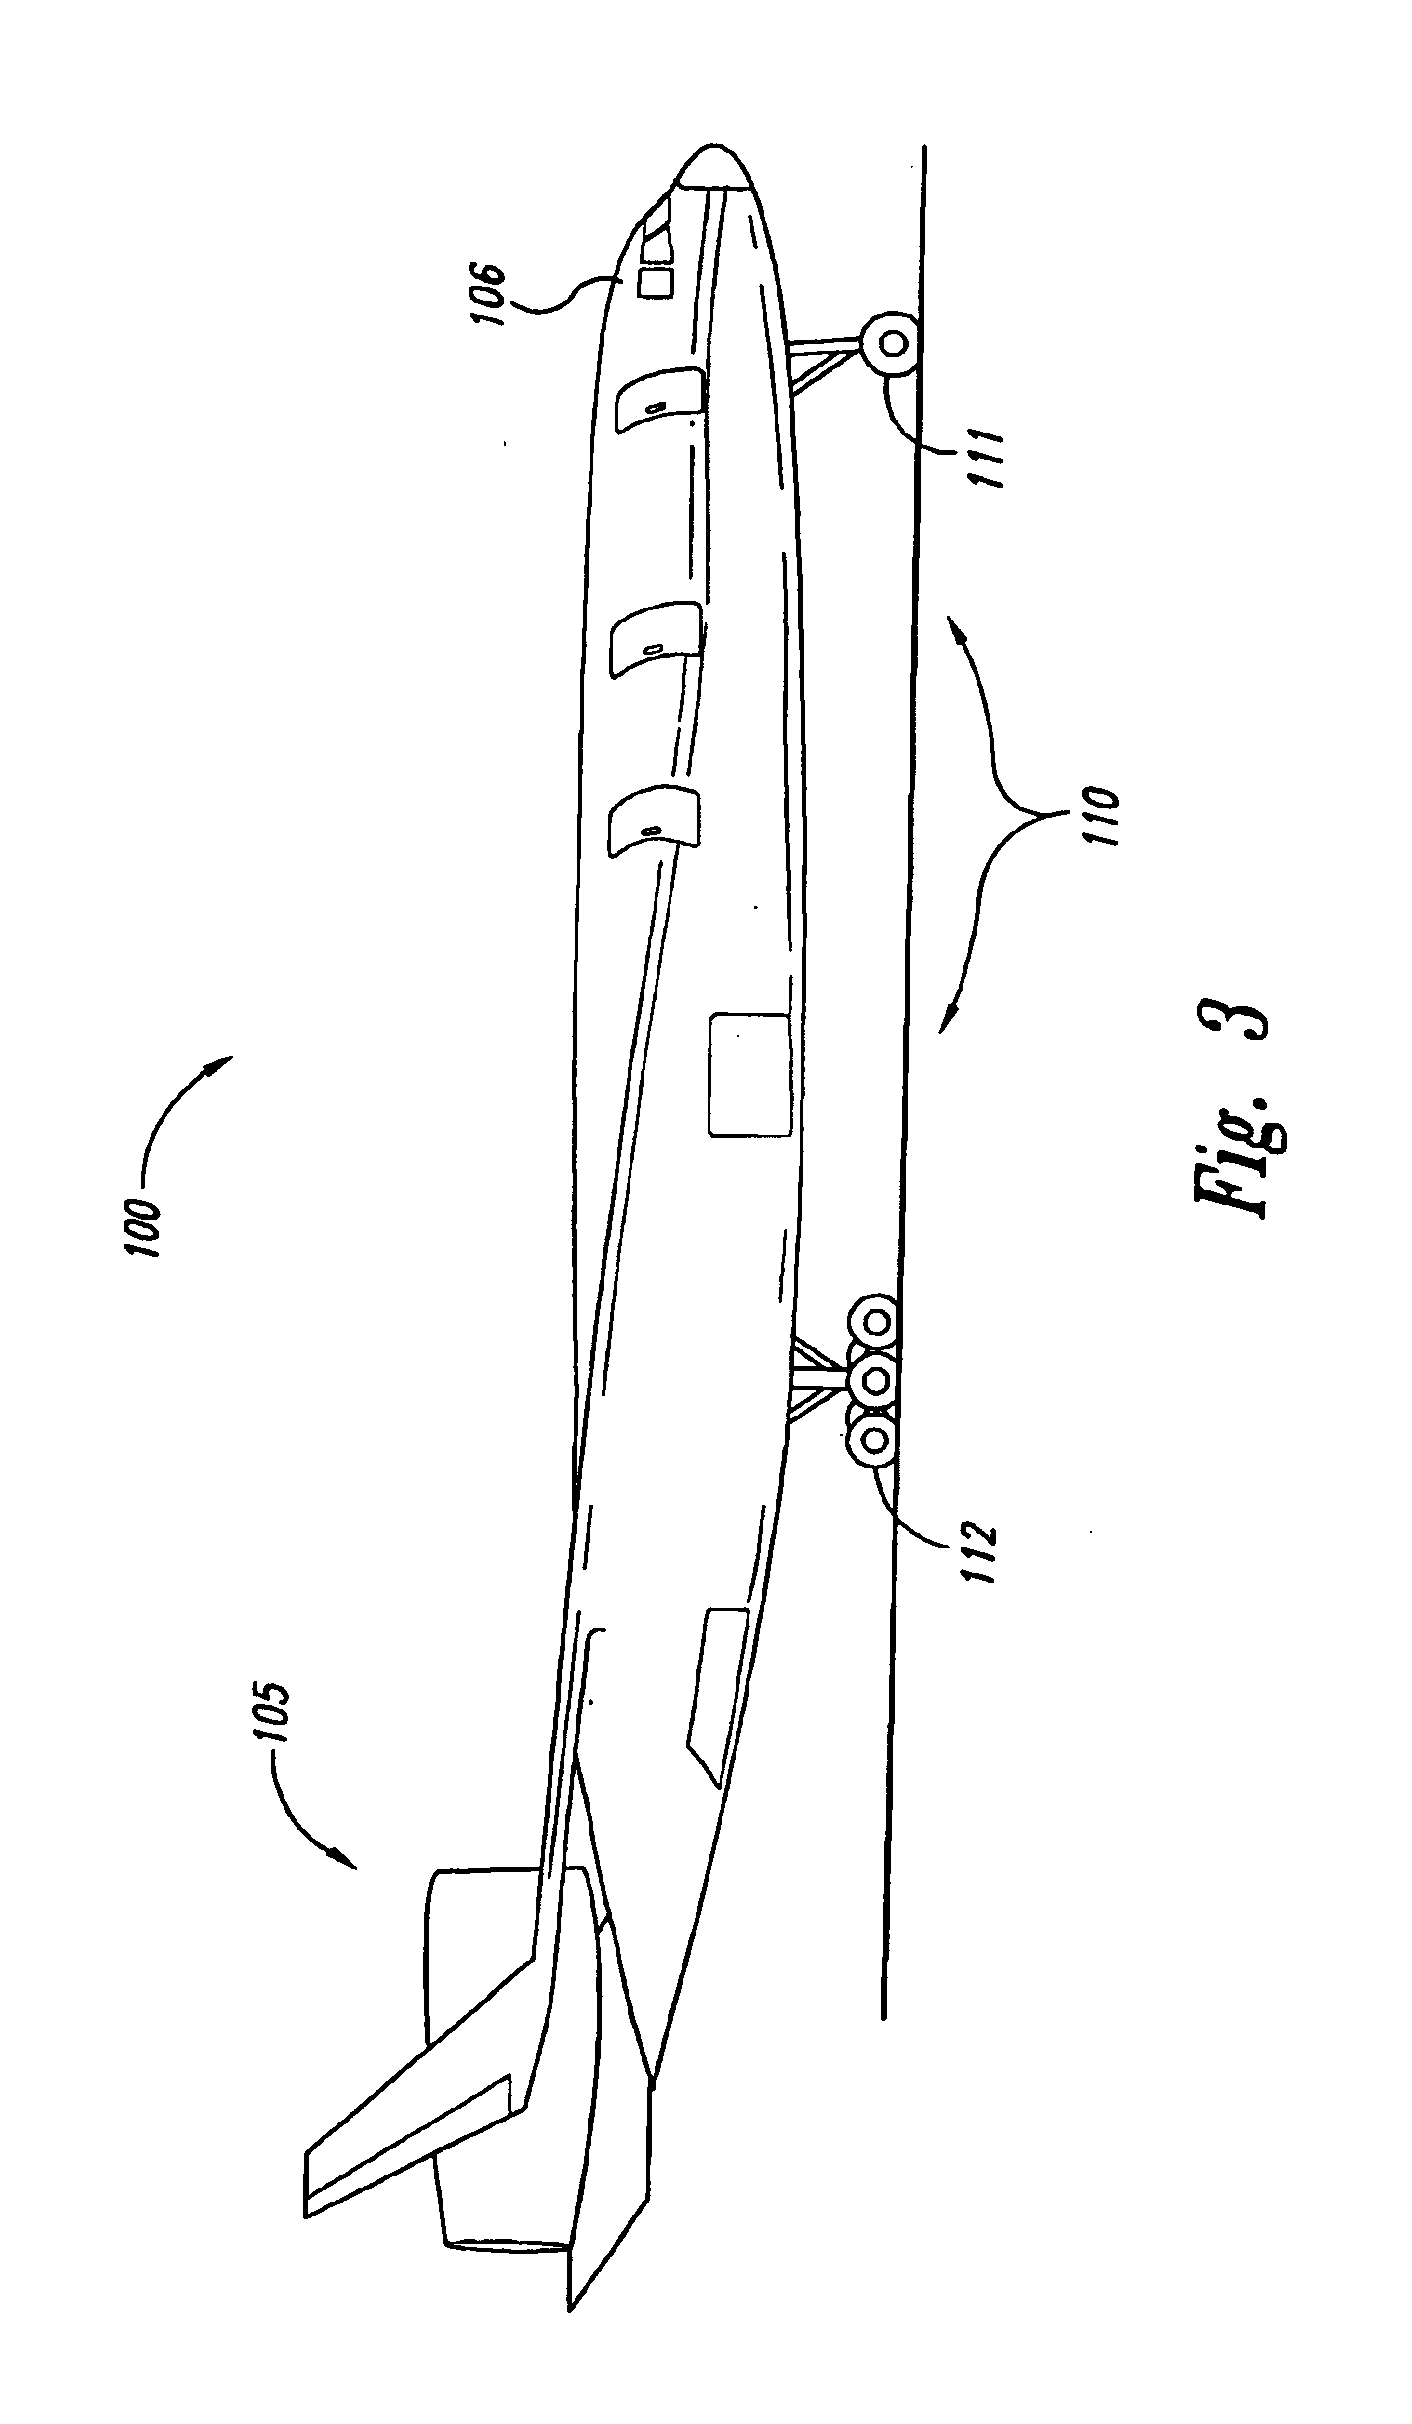 Method and system for presenting moving simulated images in a moving vehicle